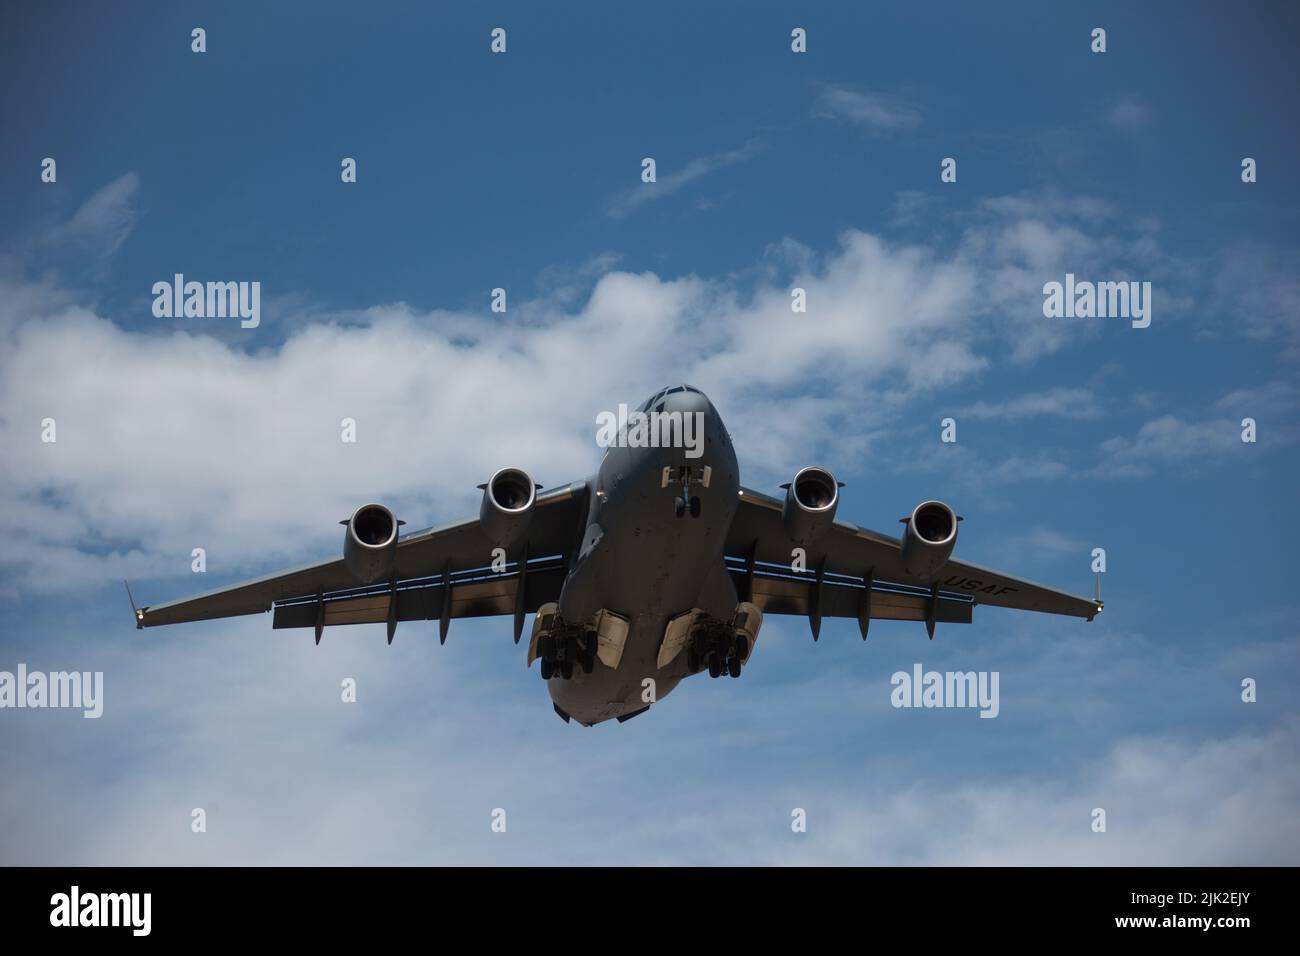 A U.S. Air Force C-17 Globemaster III aircraft prepares to land during a joint training exercise on Marine Corps Air Station Camp Pendleton, California, July 25, 2022. This exercise included aircraft from five different Air Force squadrons and U.S. Marines with 3rd Battalion, 5th Marine Regiment, 1st Marine Division to enhance their expeditionary operations in a joint-training environment. This was the first time MCAS Camp Pendleton staged five Globemaster III aircraft on the air station at the same time. (U.S. Marine Corps photo by Cpl. Shaina Jupiter) Stock Photo